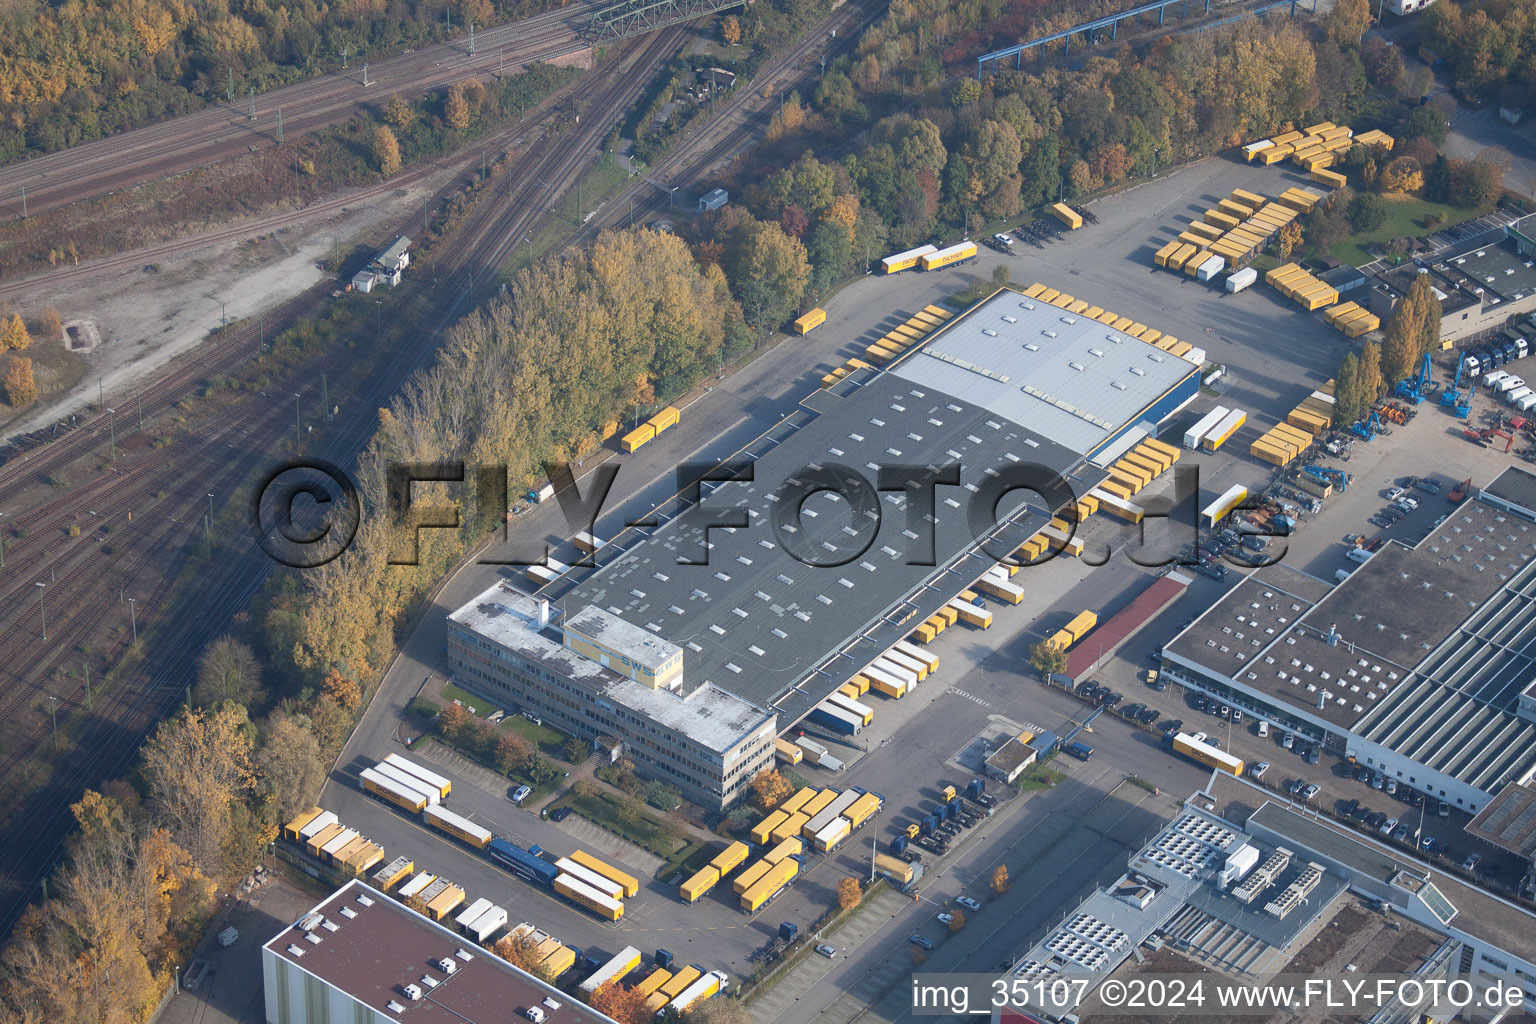 Aerial view of Warehouses and forwarding building SWS-Speditions-GmbH, Otto-street in the district Durlach in Karlsruhe in the state Baden-Wurttemberg